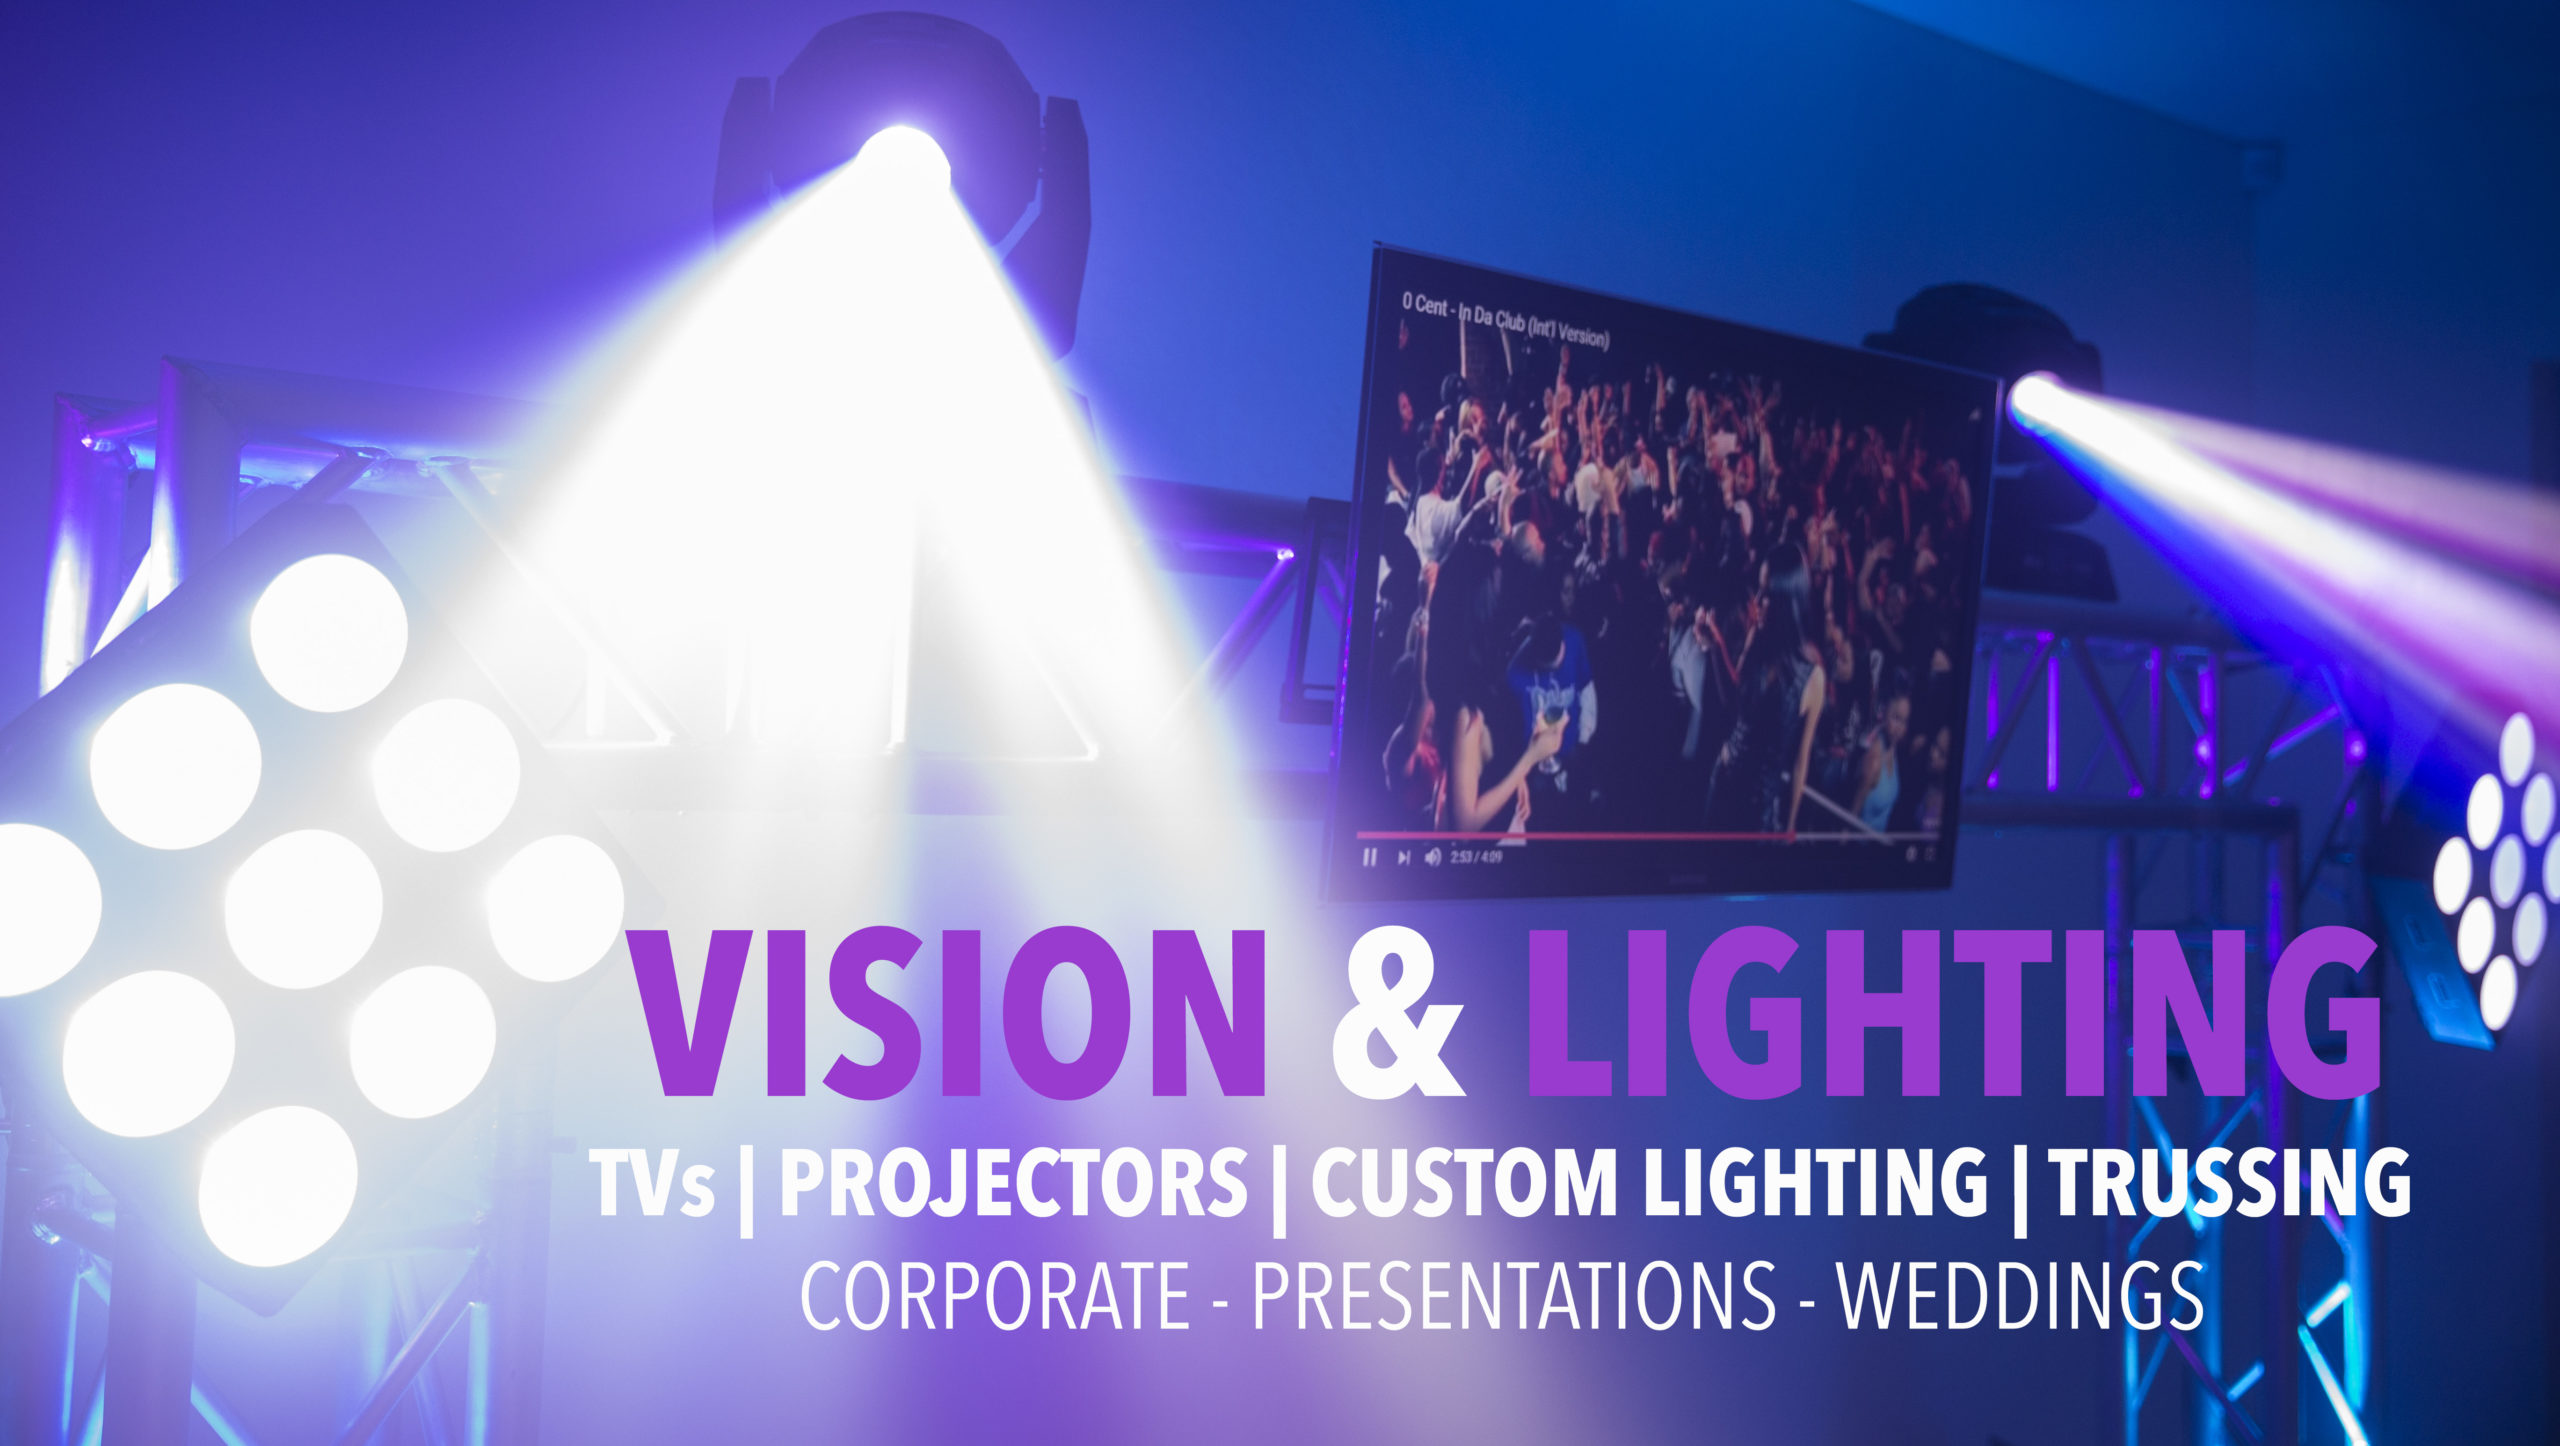 Audio visual and lighting hire sydney cheap